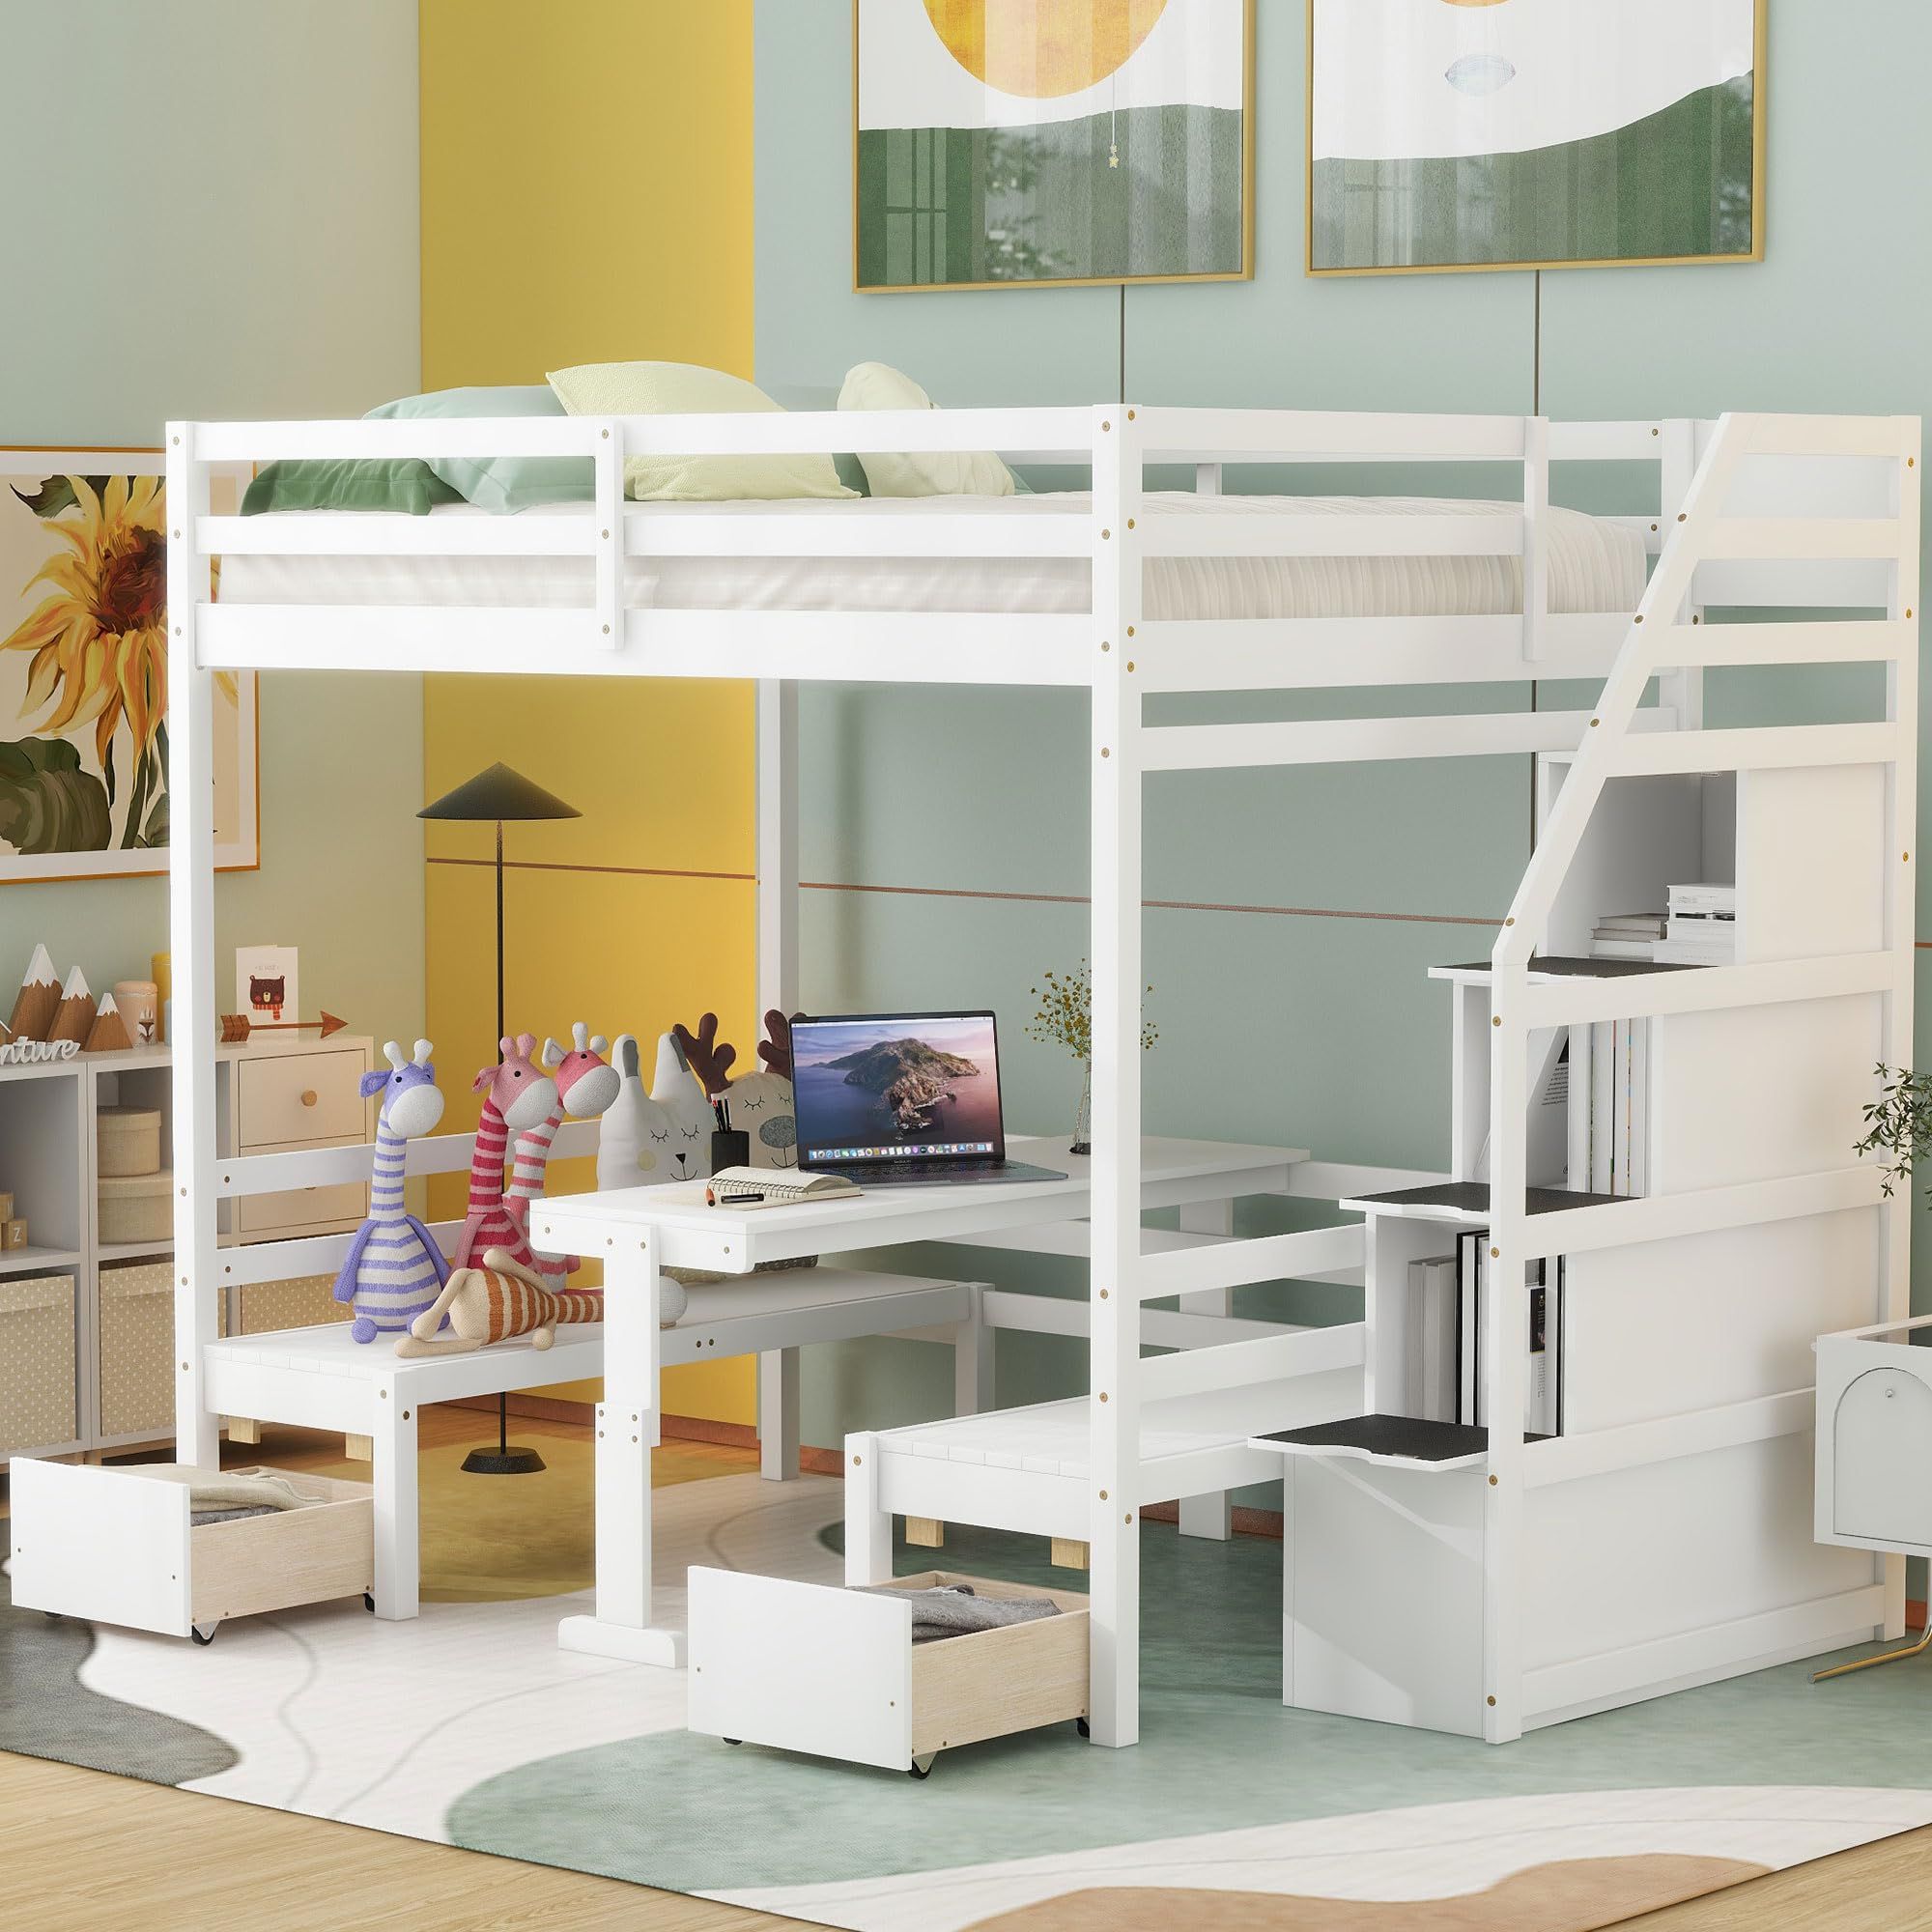 Selecting cool loft bunk beds with  storage for kids